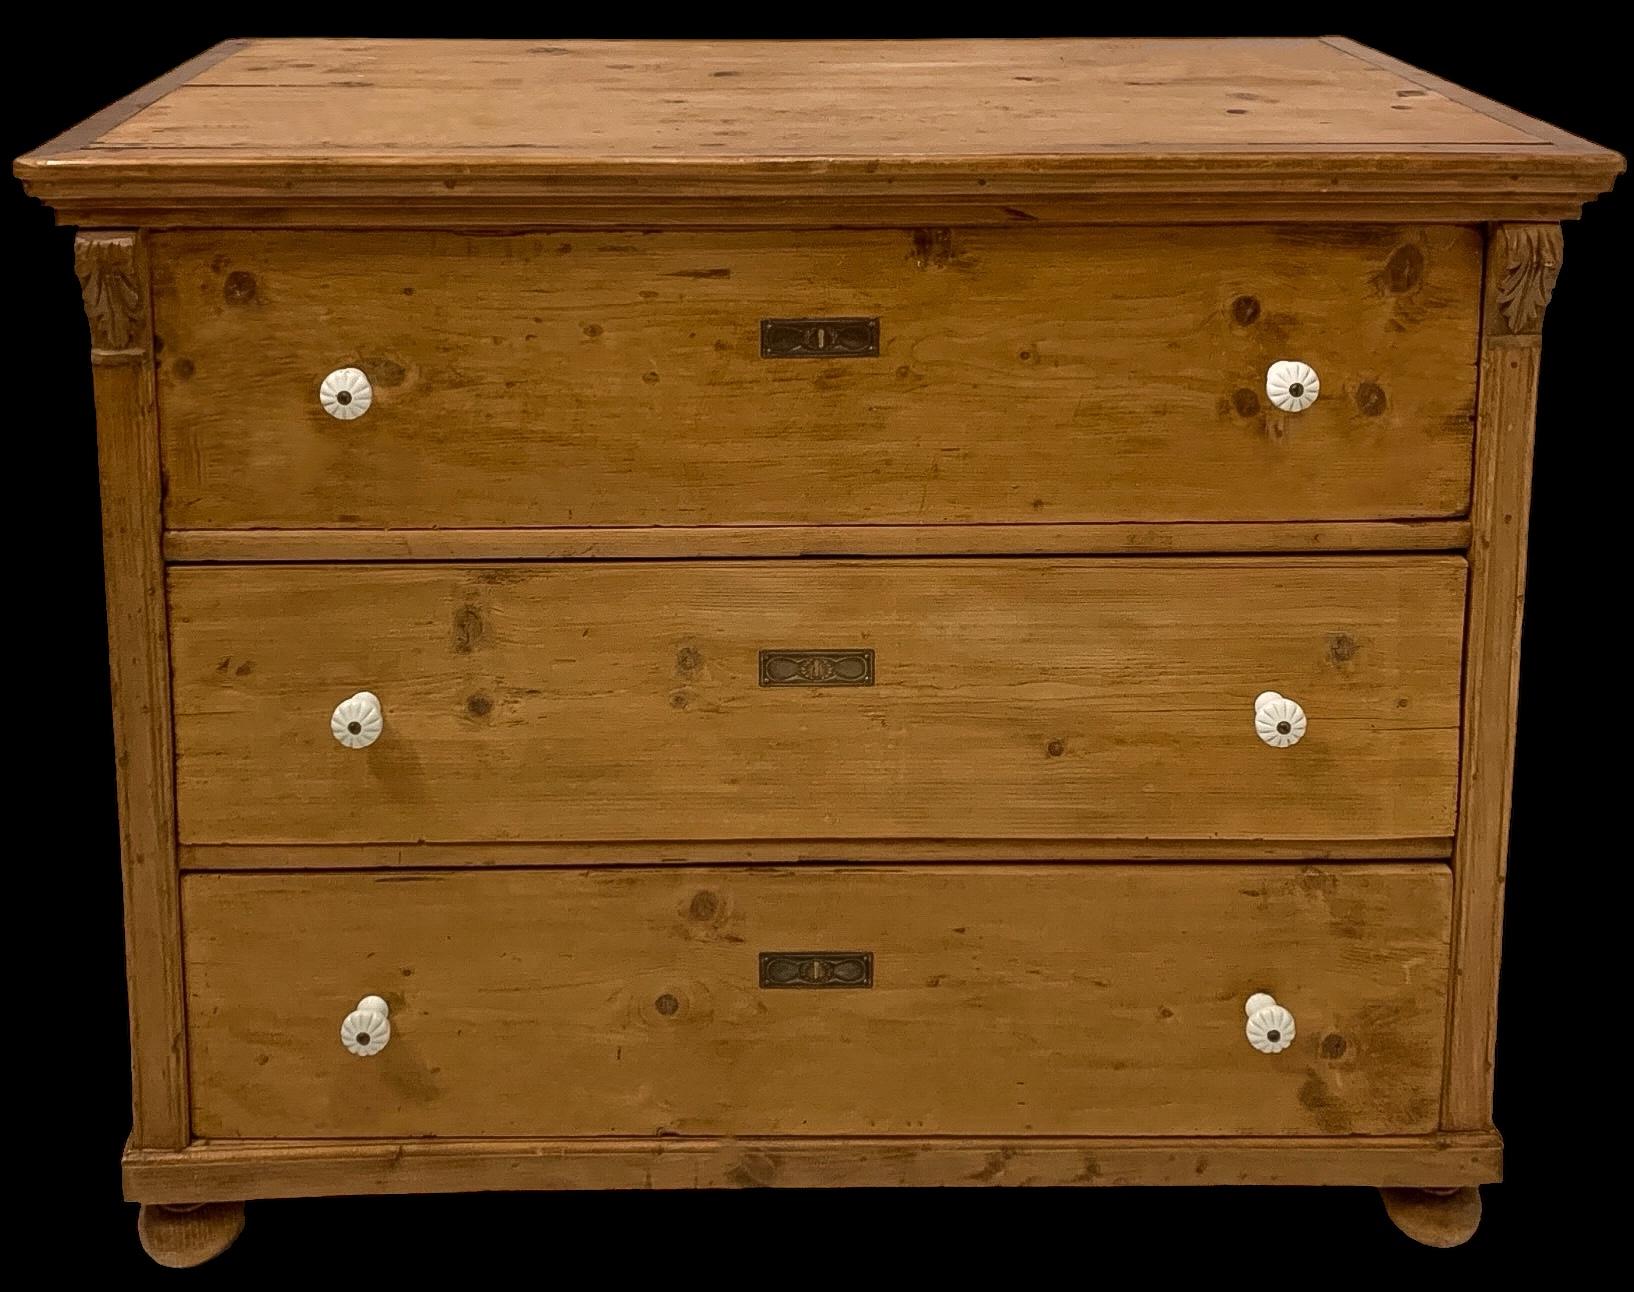 This is a large scale 19th century English carved pine chest or commode with porcelain knobs. The drawers have dovetail construction. It has age appropriate patina.